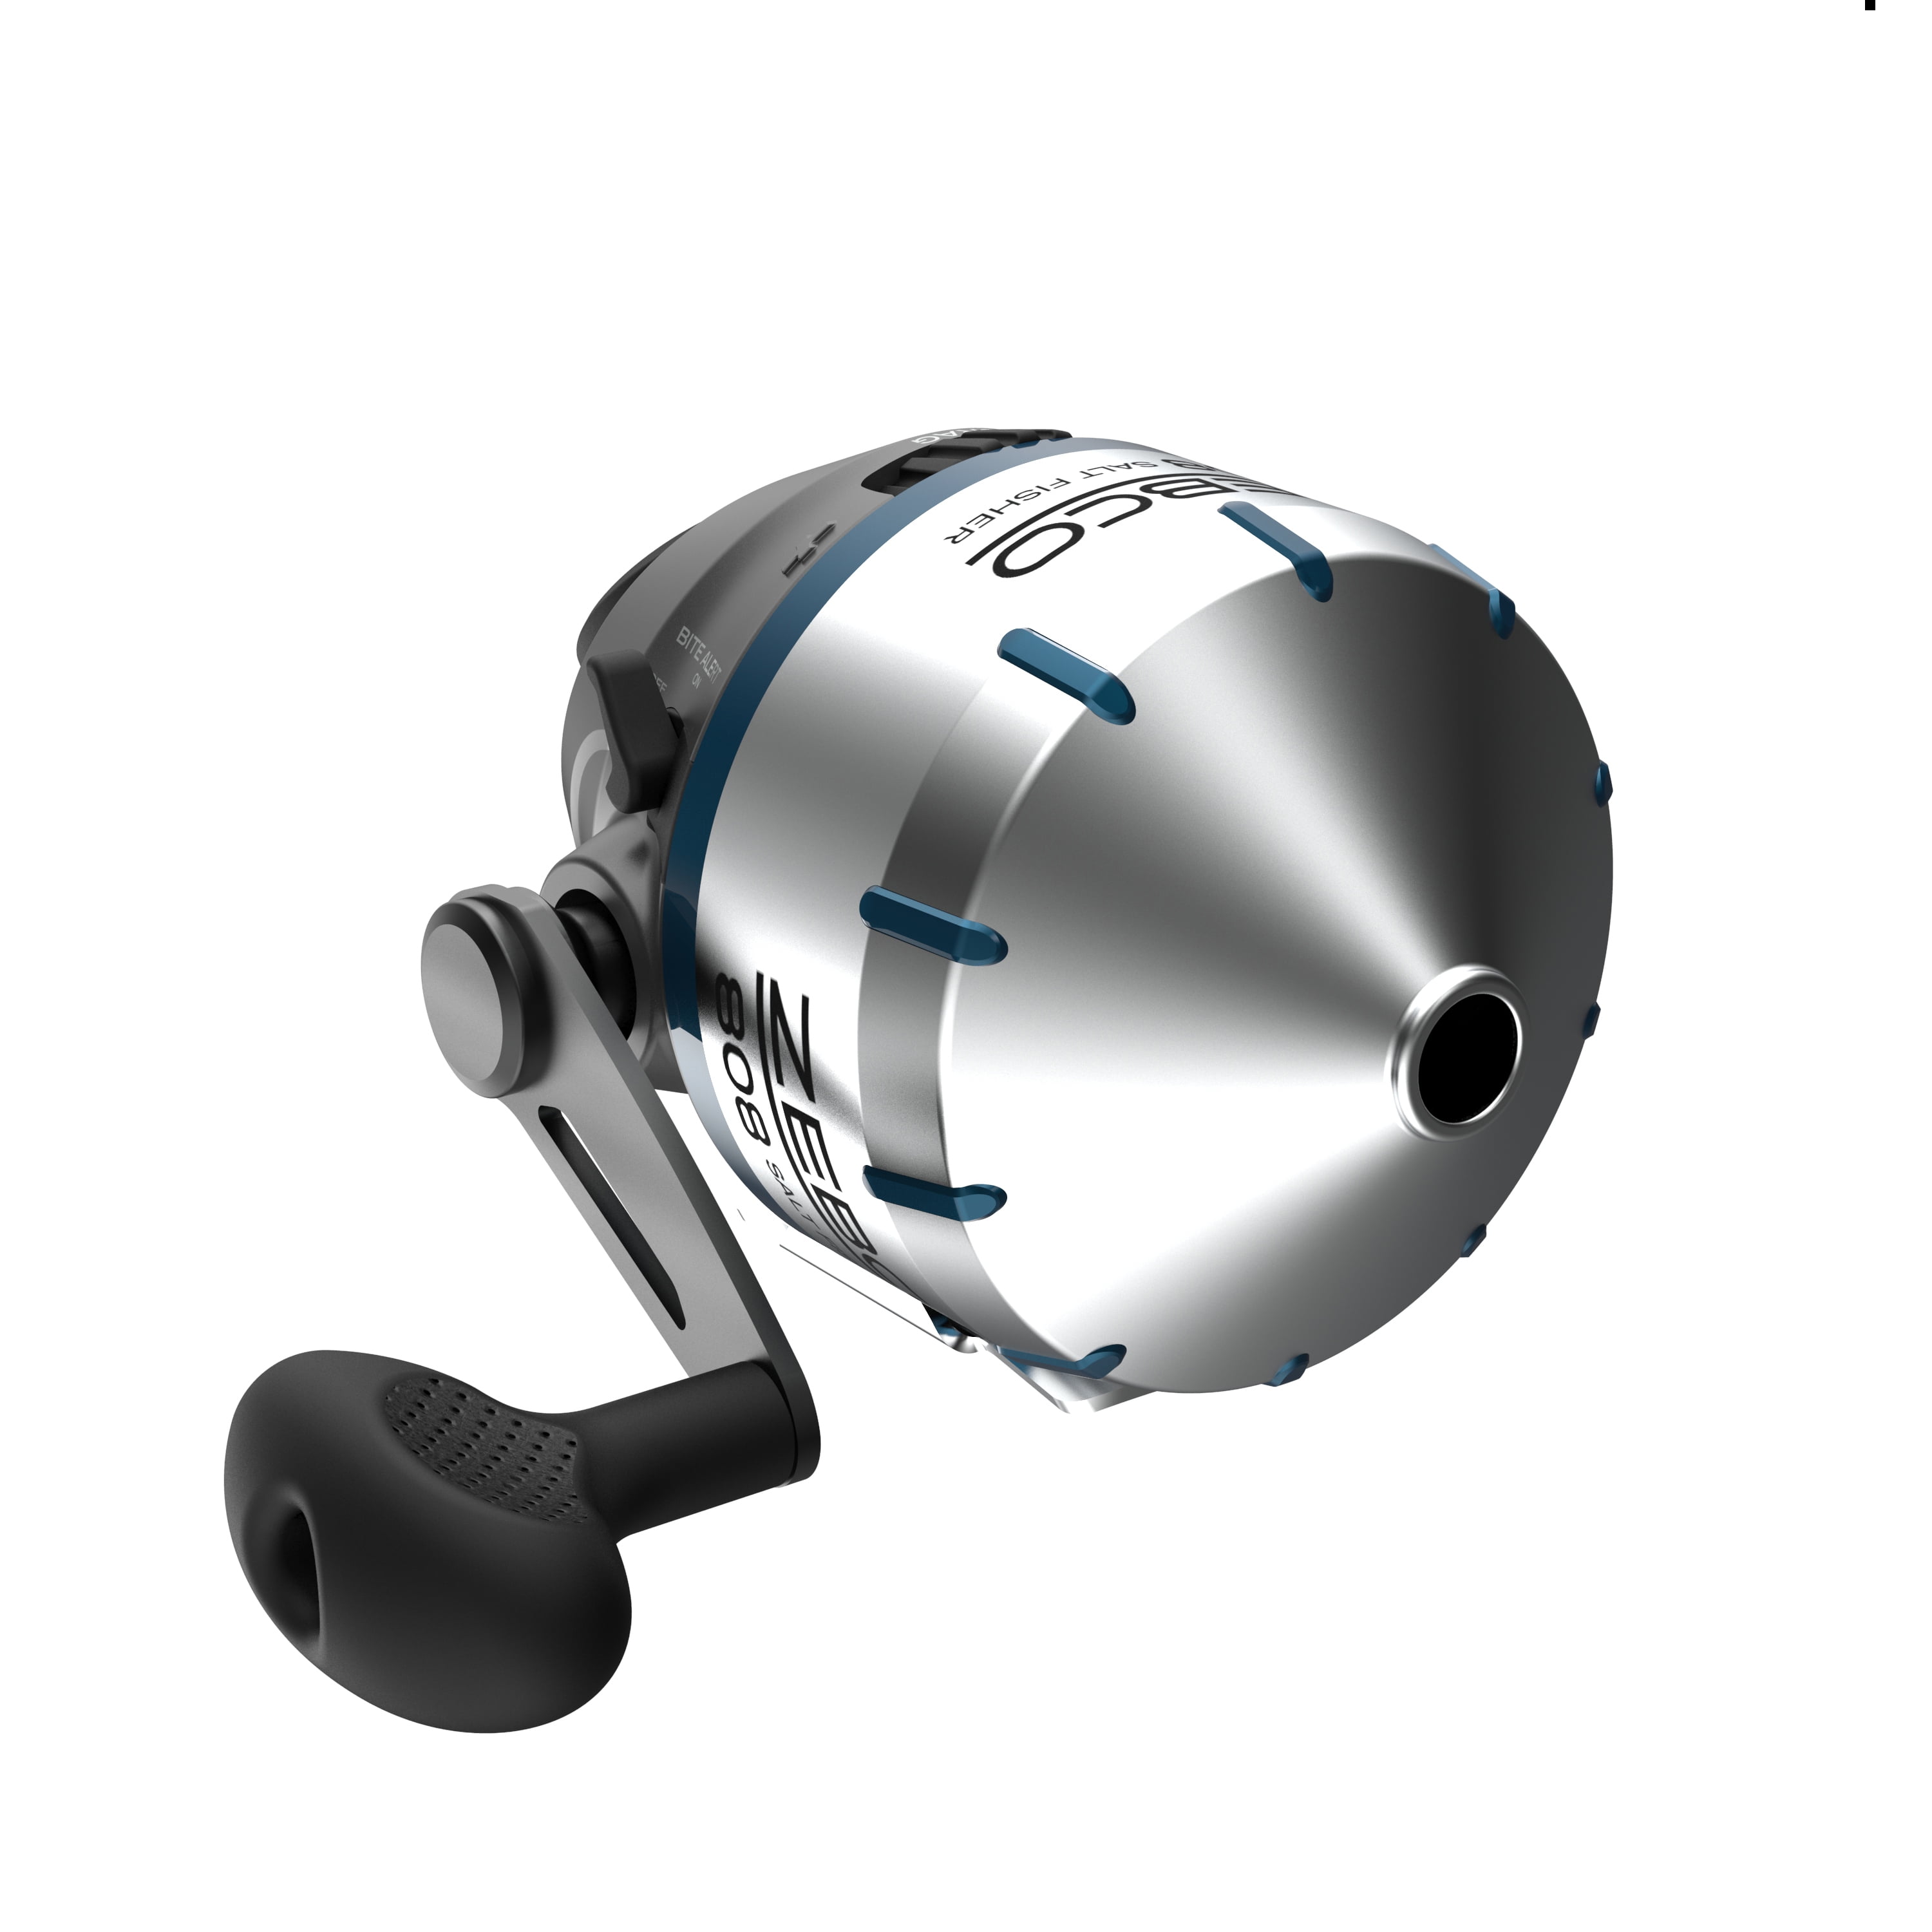 Zebco 808 Saltfisher Spincast Fishing Reel, Size 80 Reel, Changeable Right-  or Left-Hand Retrieve, Pre-Spooled with 20-Pound Zebco Fishing Line,  Stainless Steel Ball Bearing Drive, Silver 